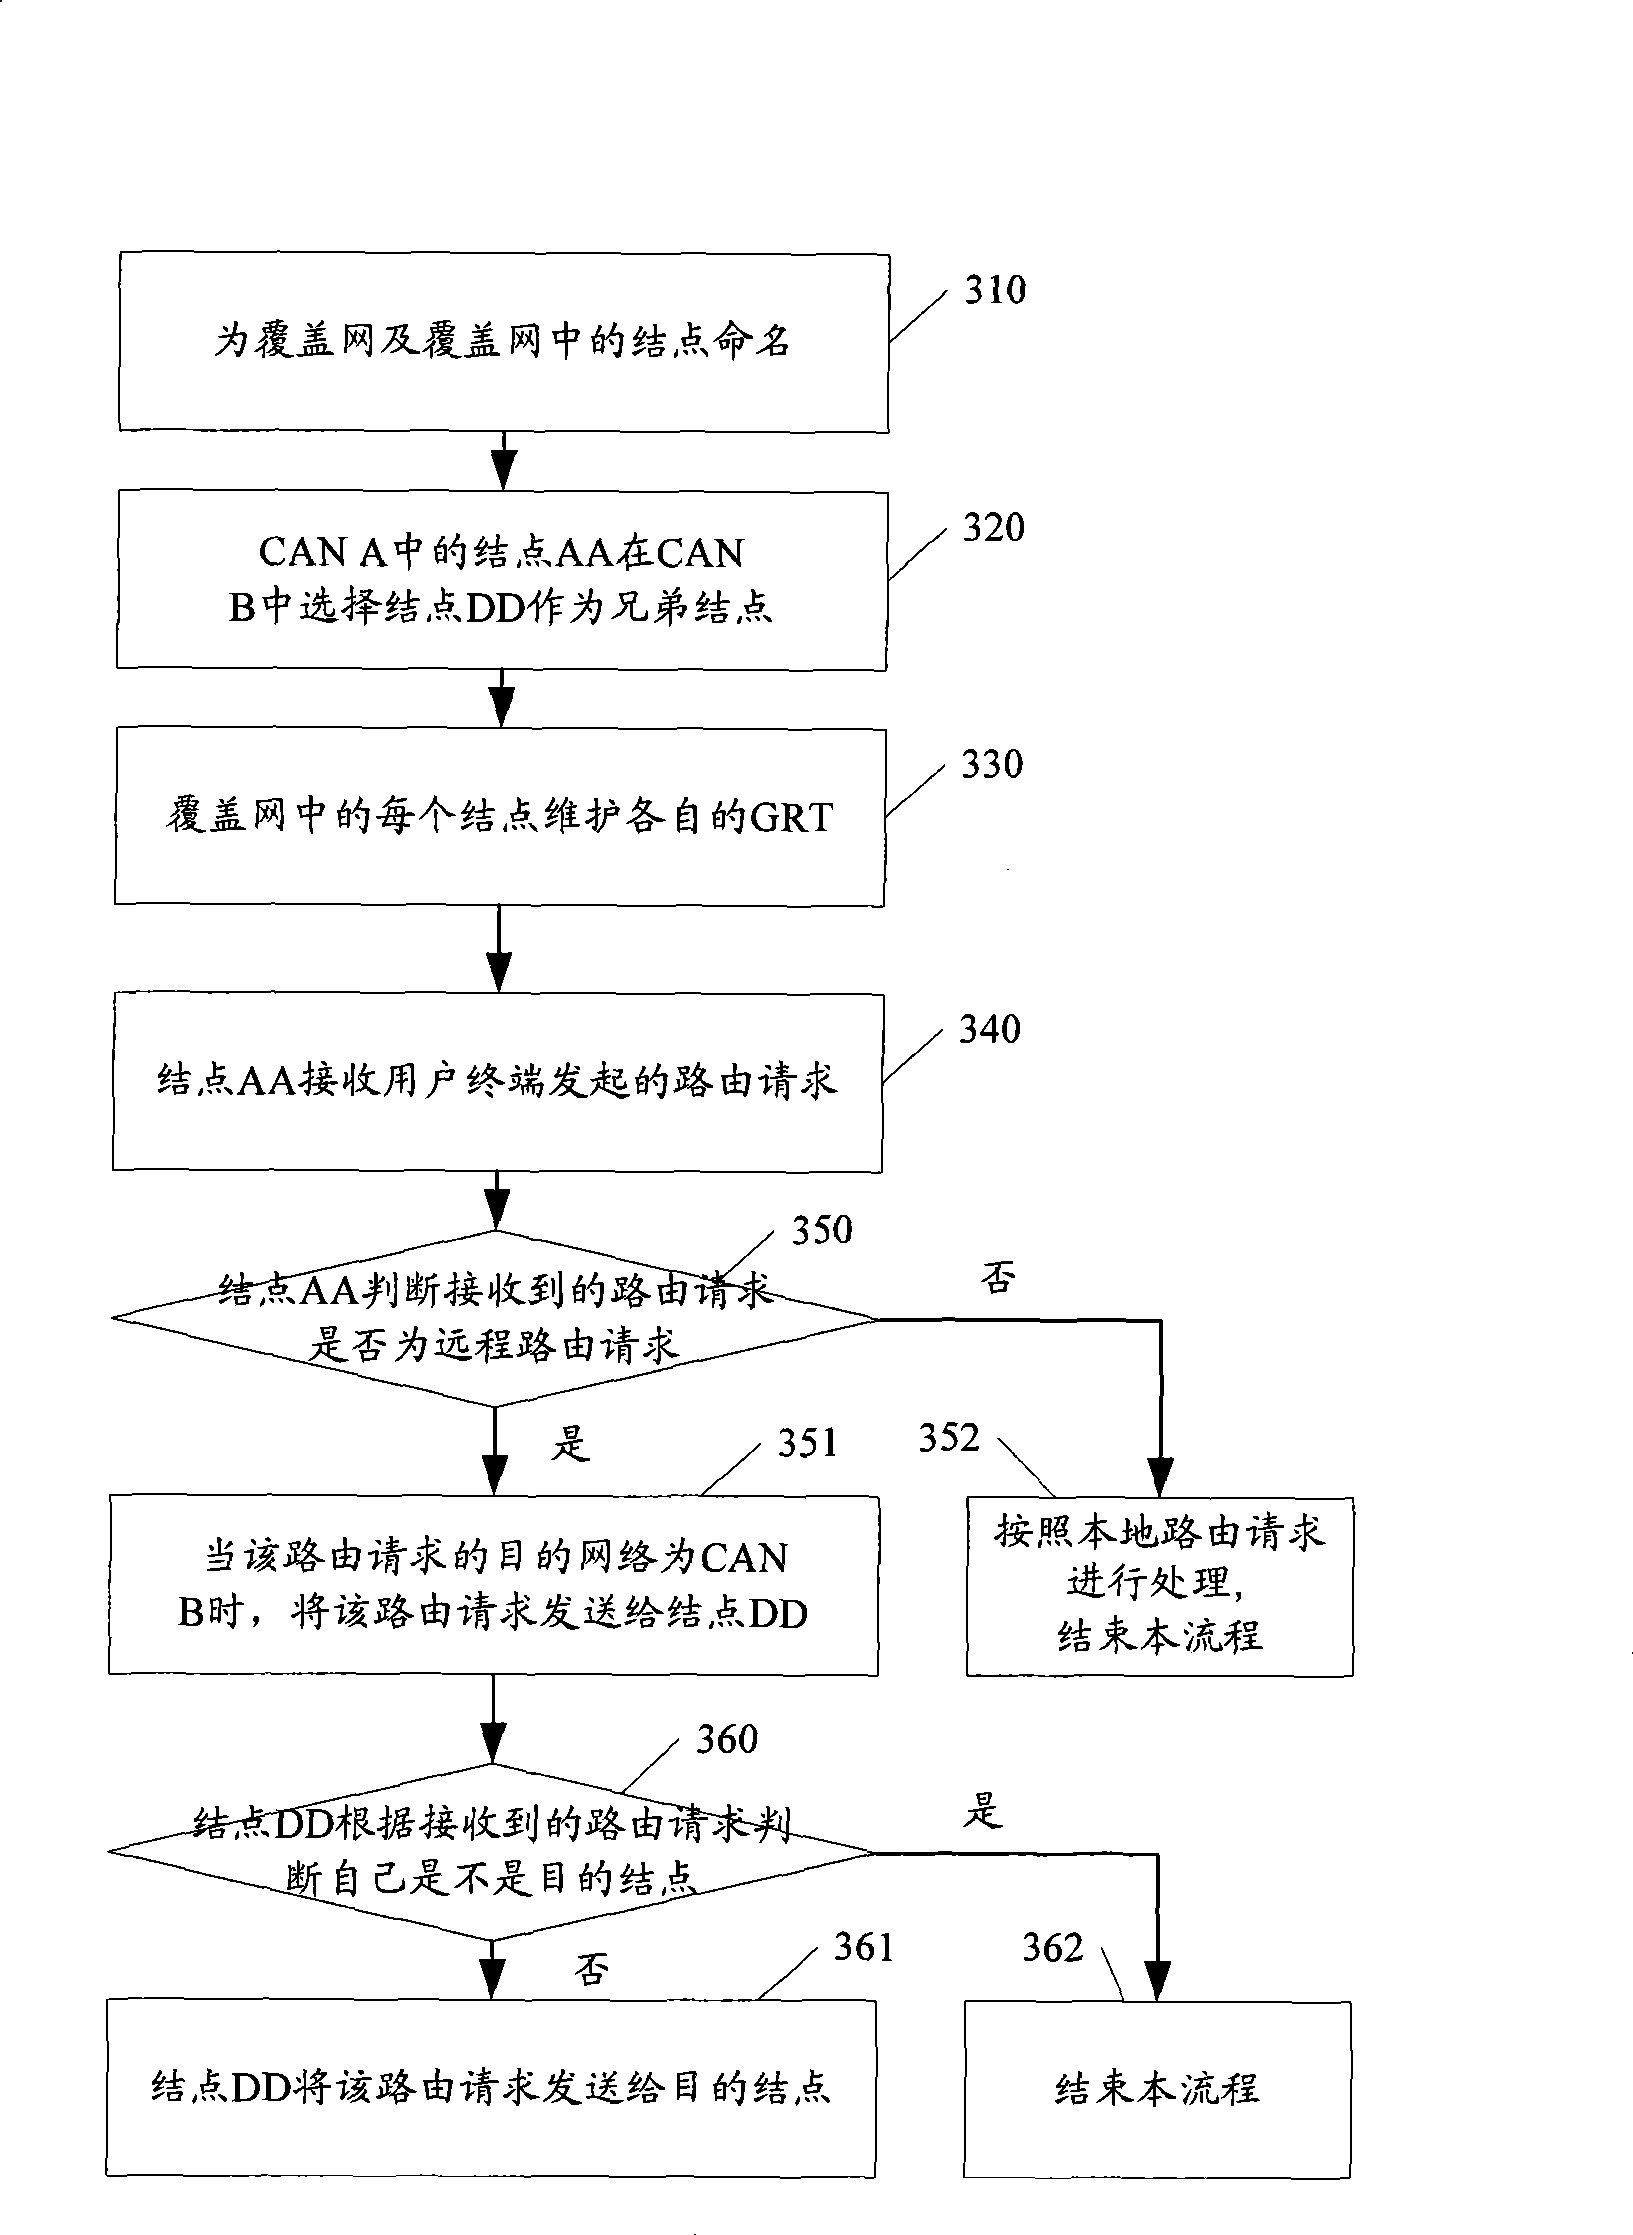 Method, system and device for coverage network interconnection implementation